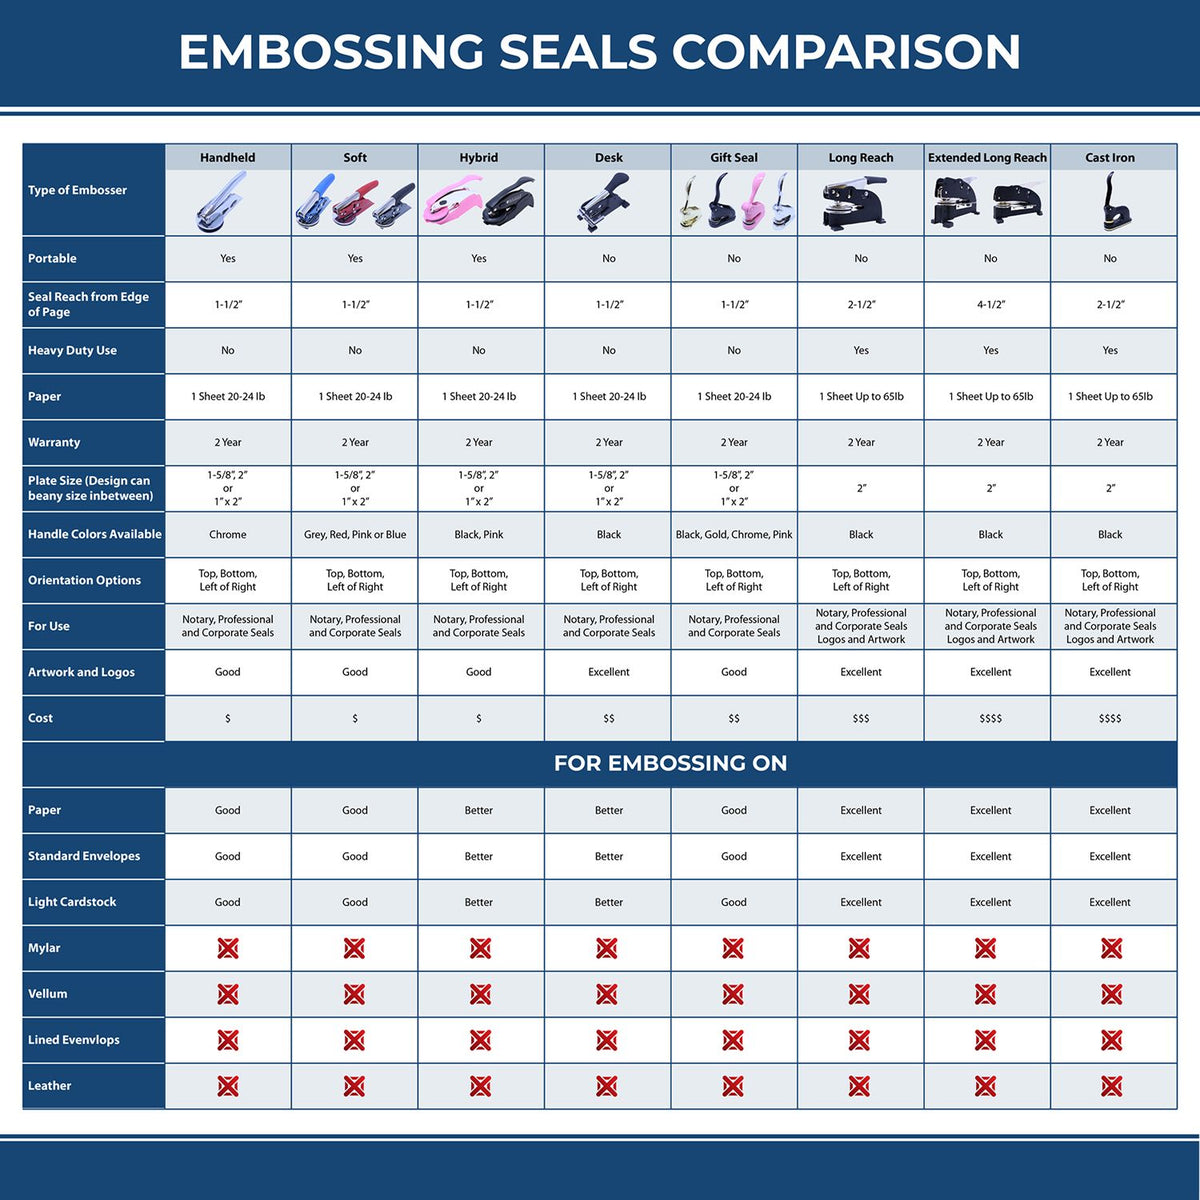 A comparison chart for the different types of mount models available for the Handheld Utah Architect Seal Embosser.